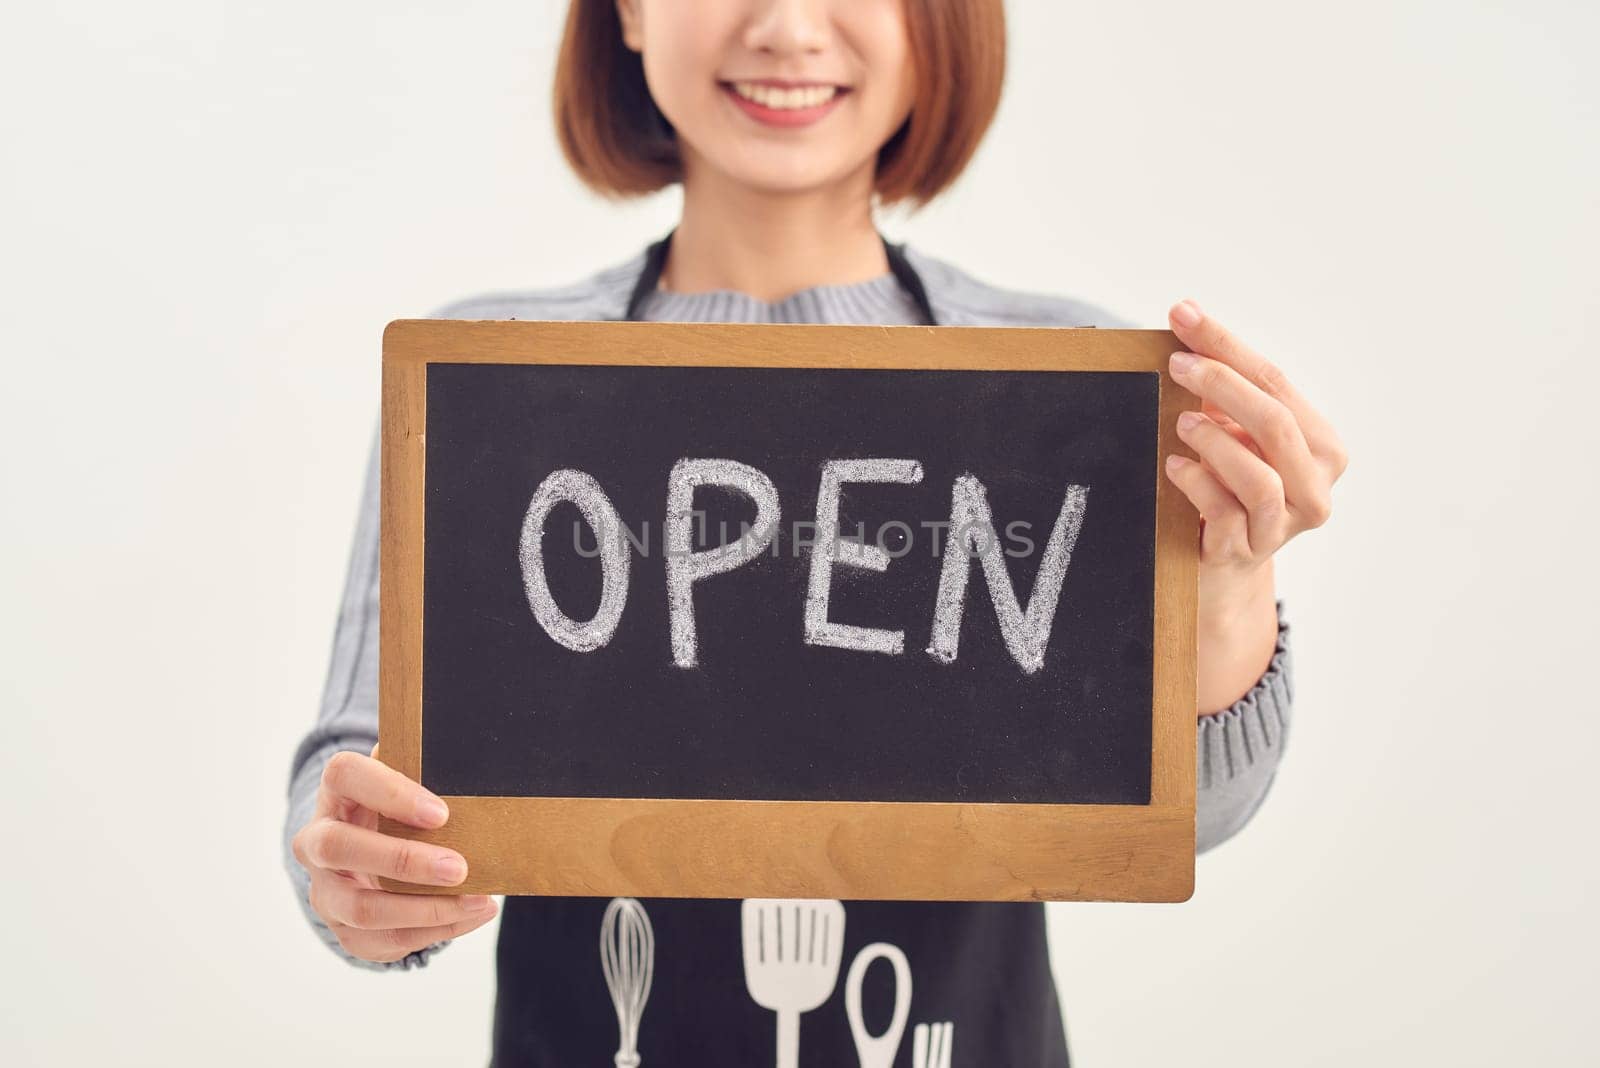 It's open here. A smiling woman is holding a sign with the inscription "open" on a white background isolated.